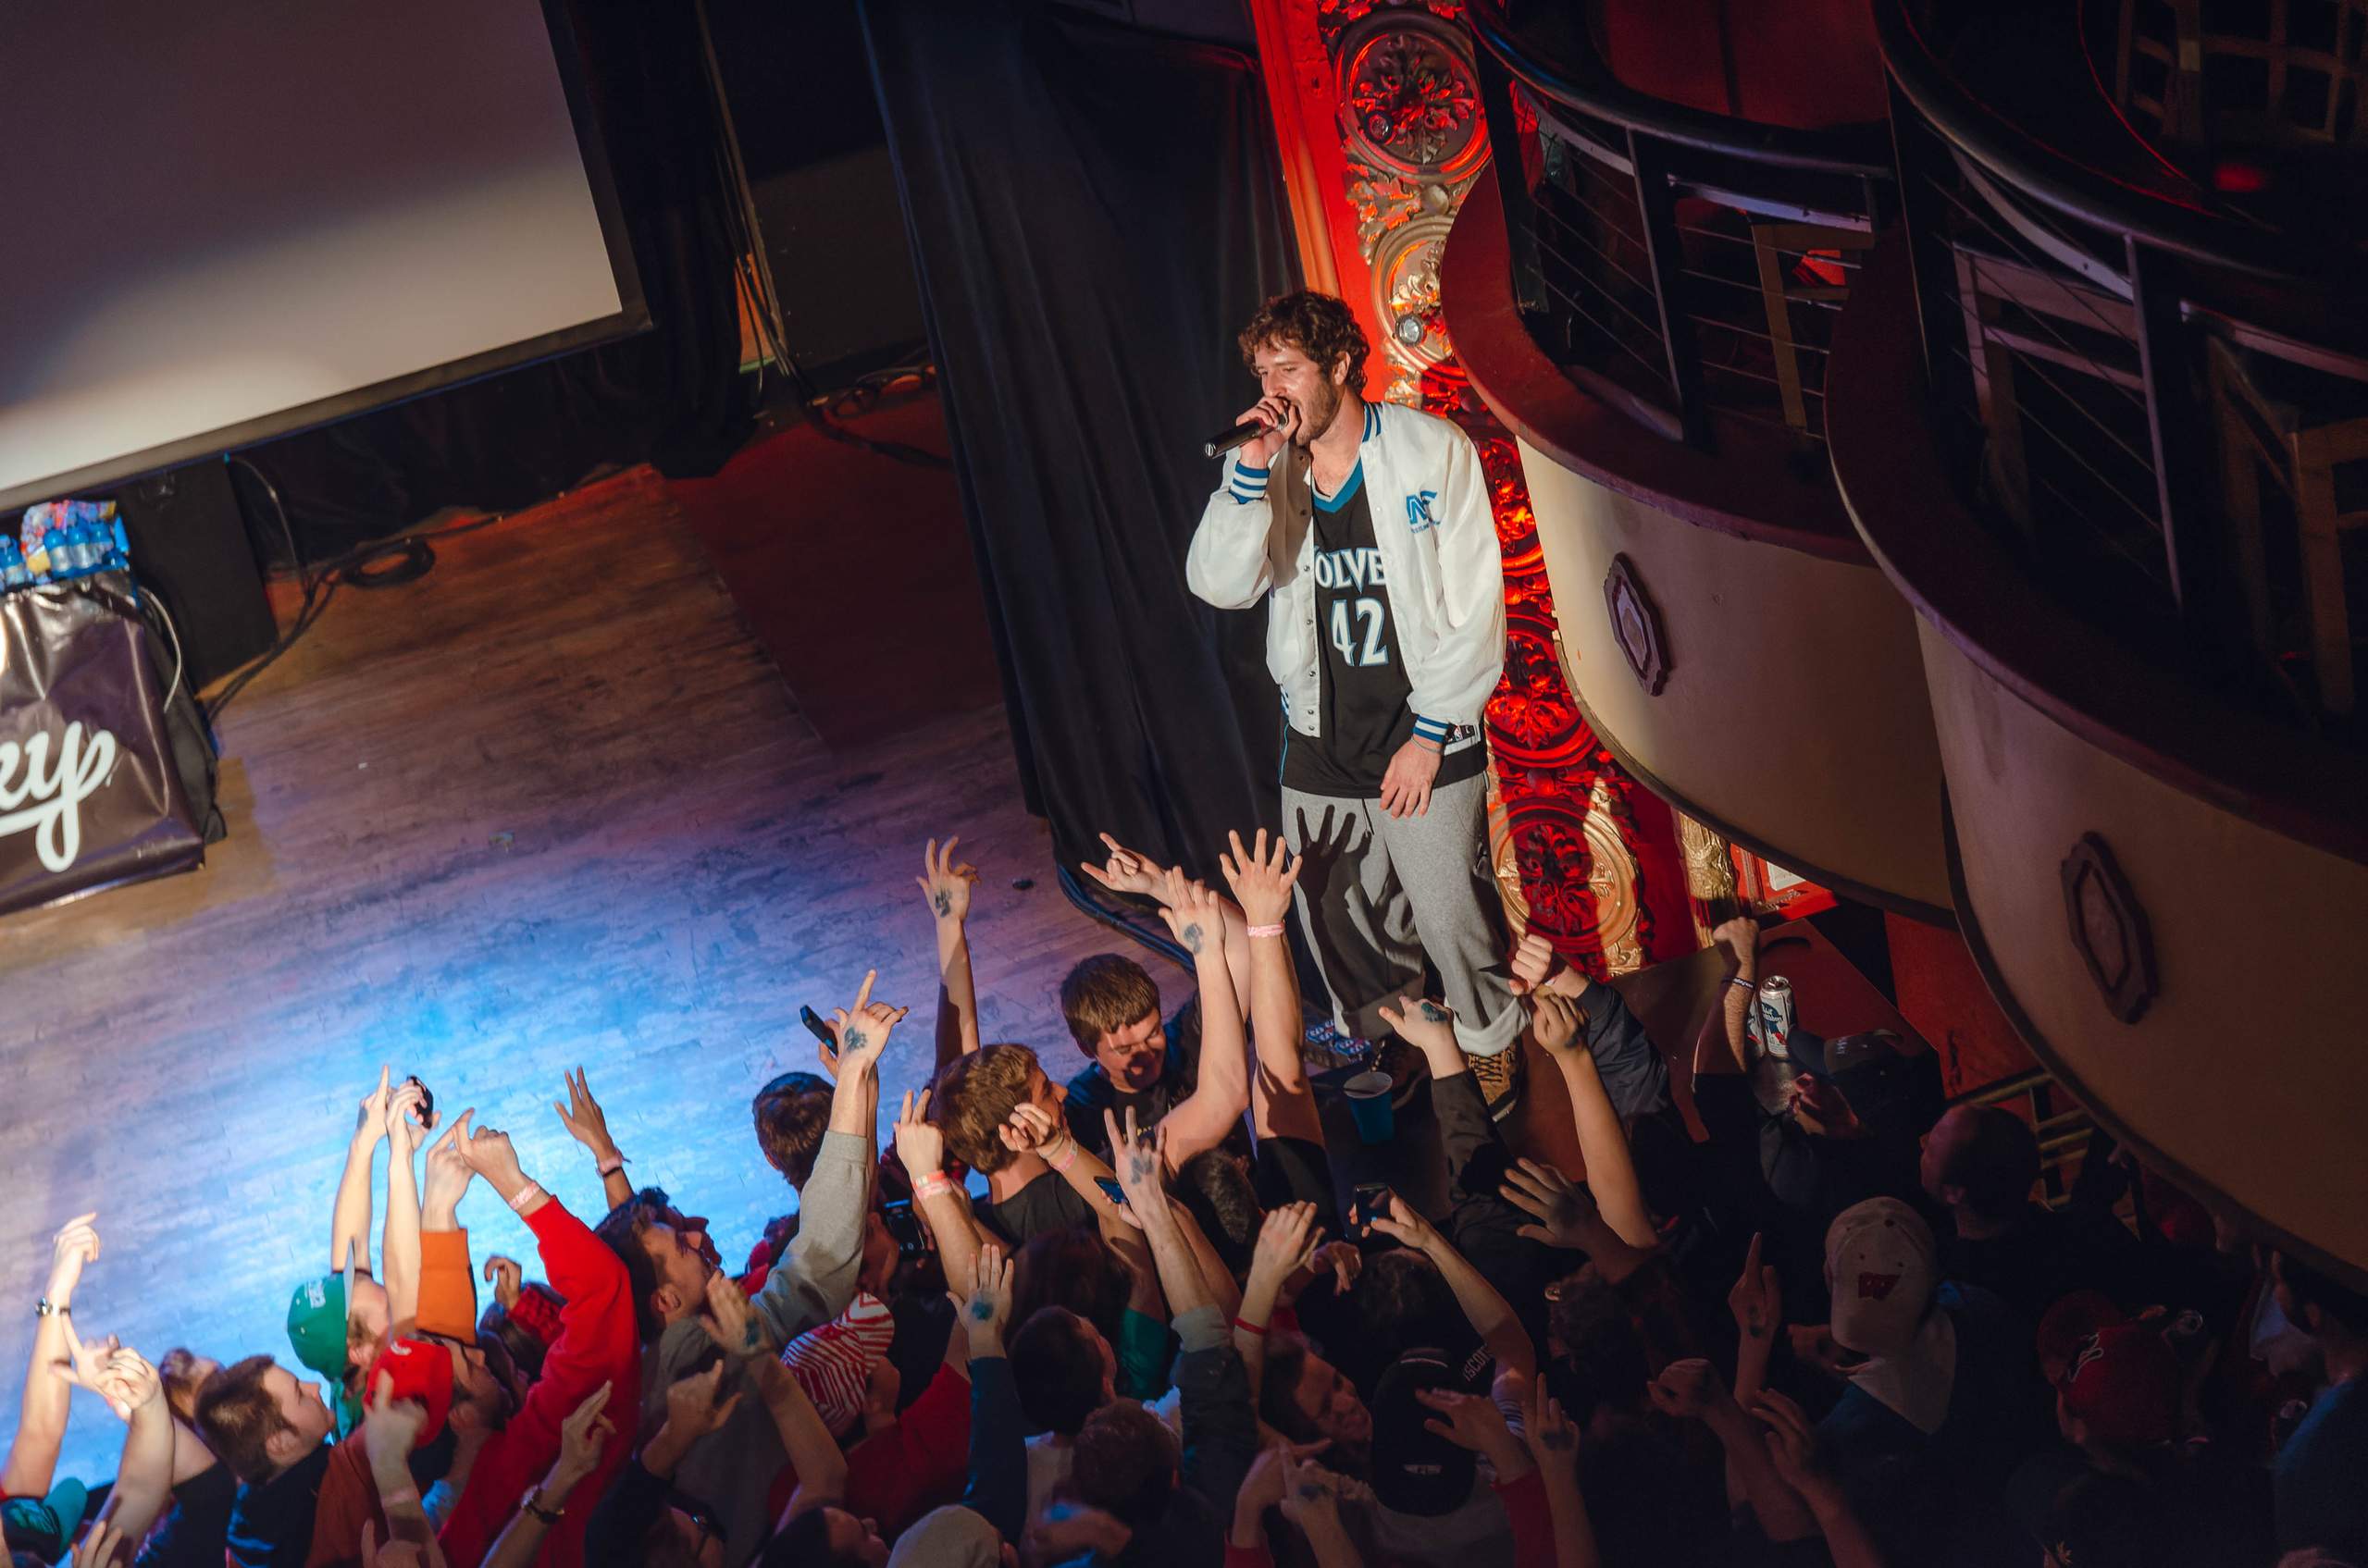 Lil Dicky performing at The Majestic in Madison, WI March 27th, 2014, photography by Ross Harried for Second Crop Music